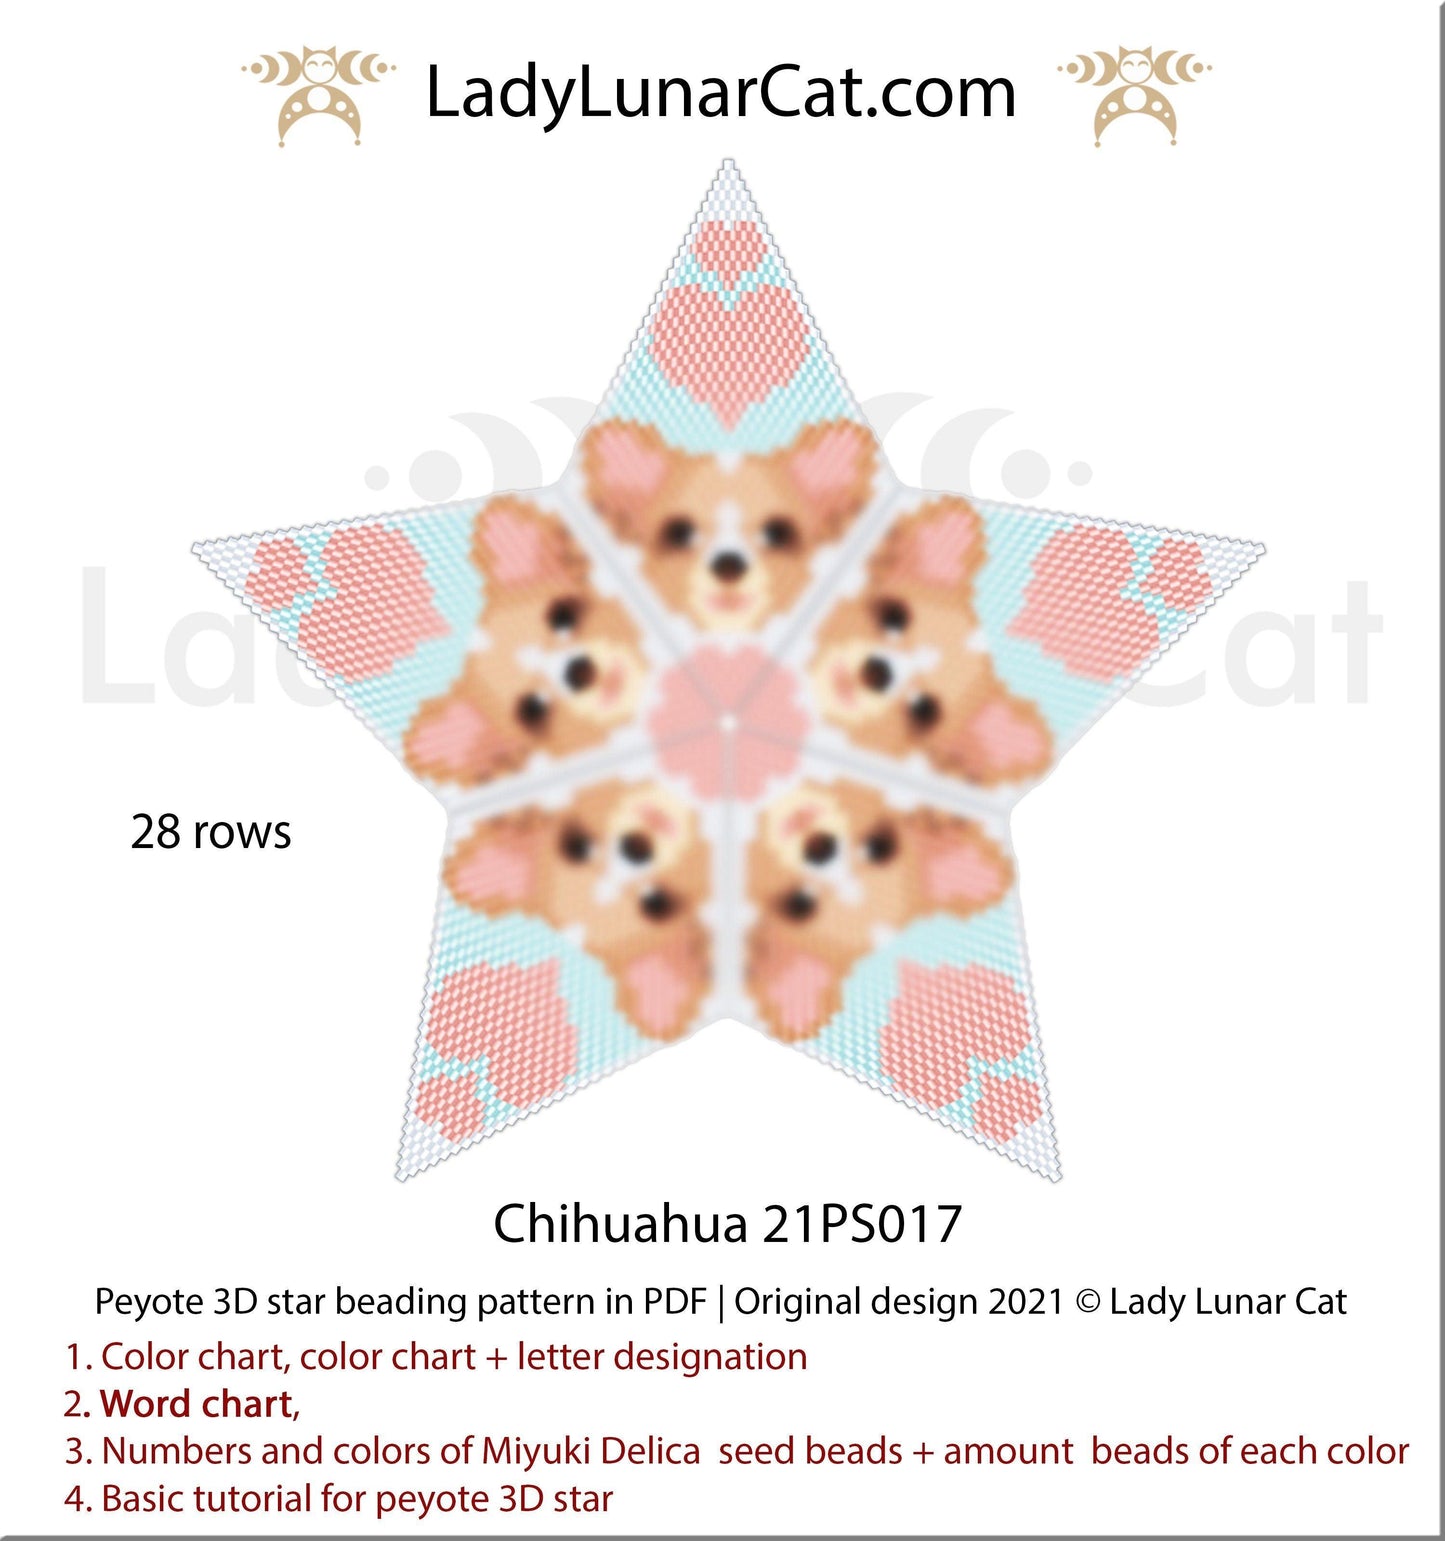 Beaded star pattern for beading - Chihuahua 21PS017 LadyLunarCat